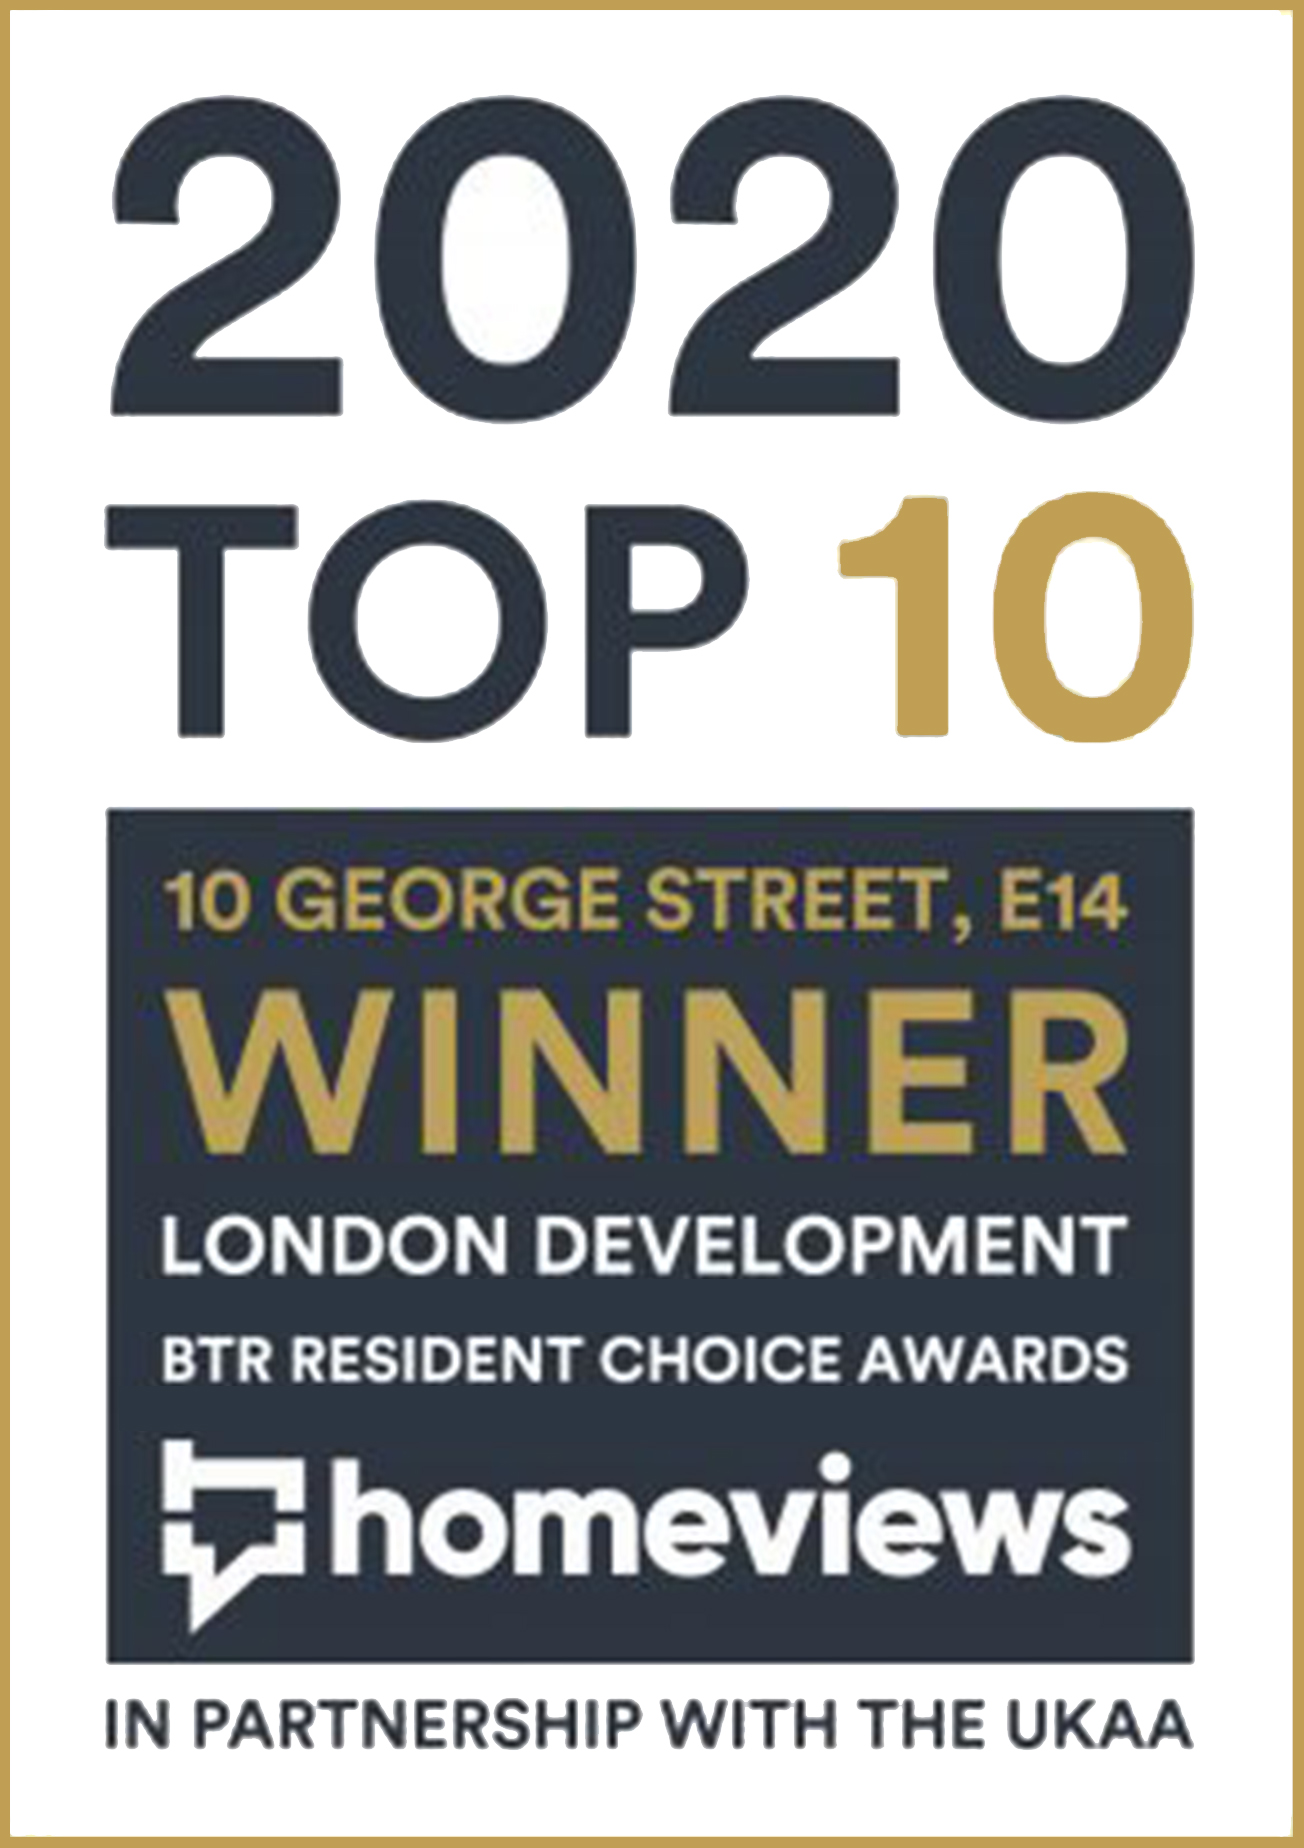 Homeviews BTR Resident Choice Awards Banner | 10 George Street by Angel O'Donnell